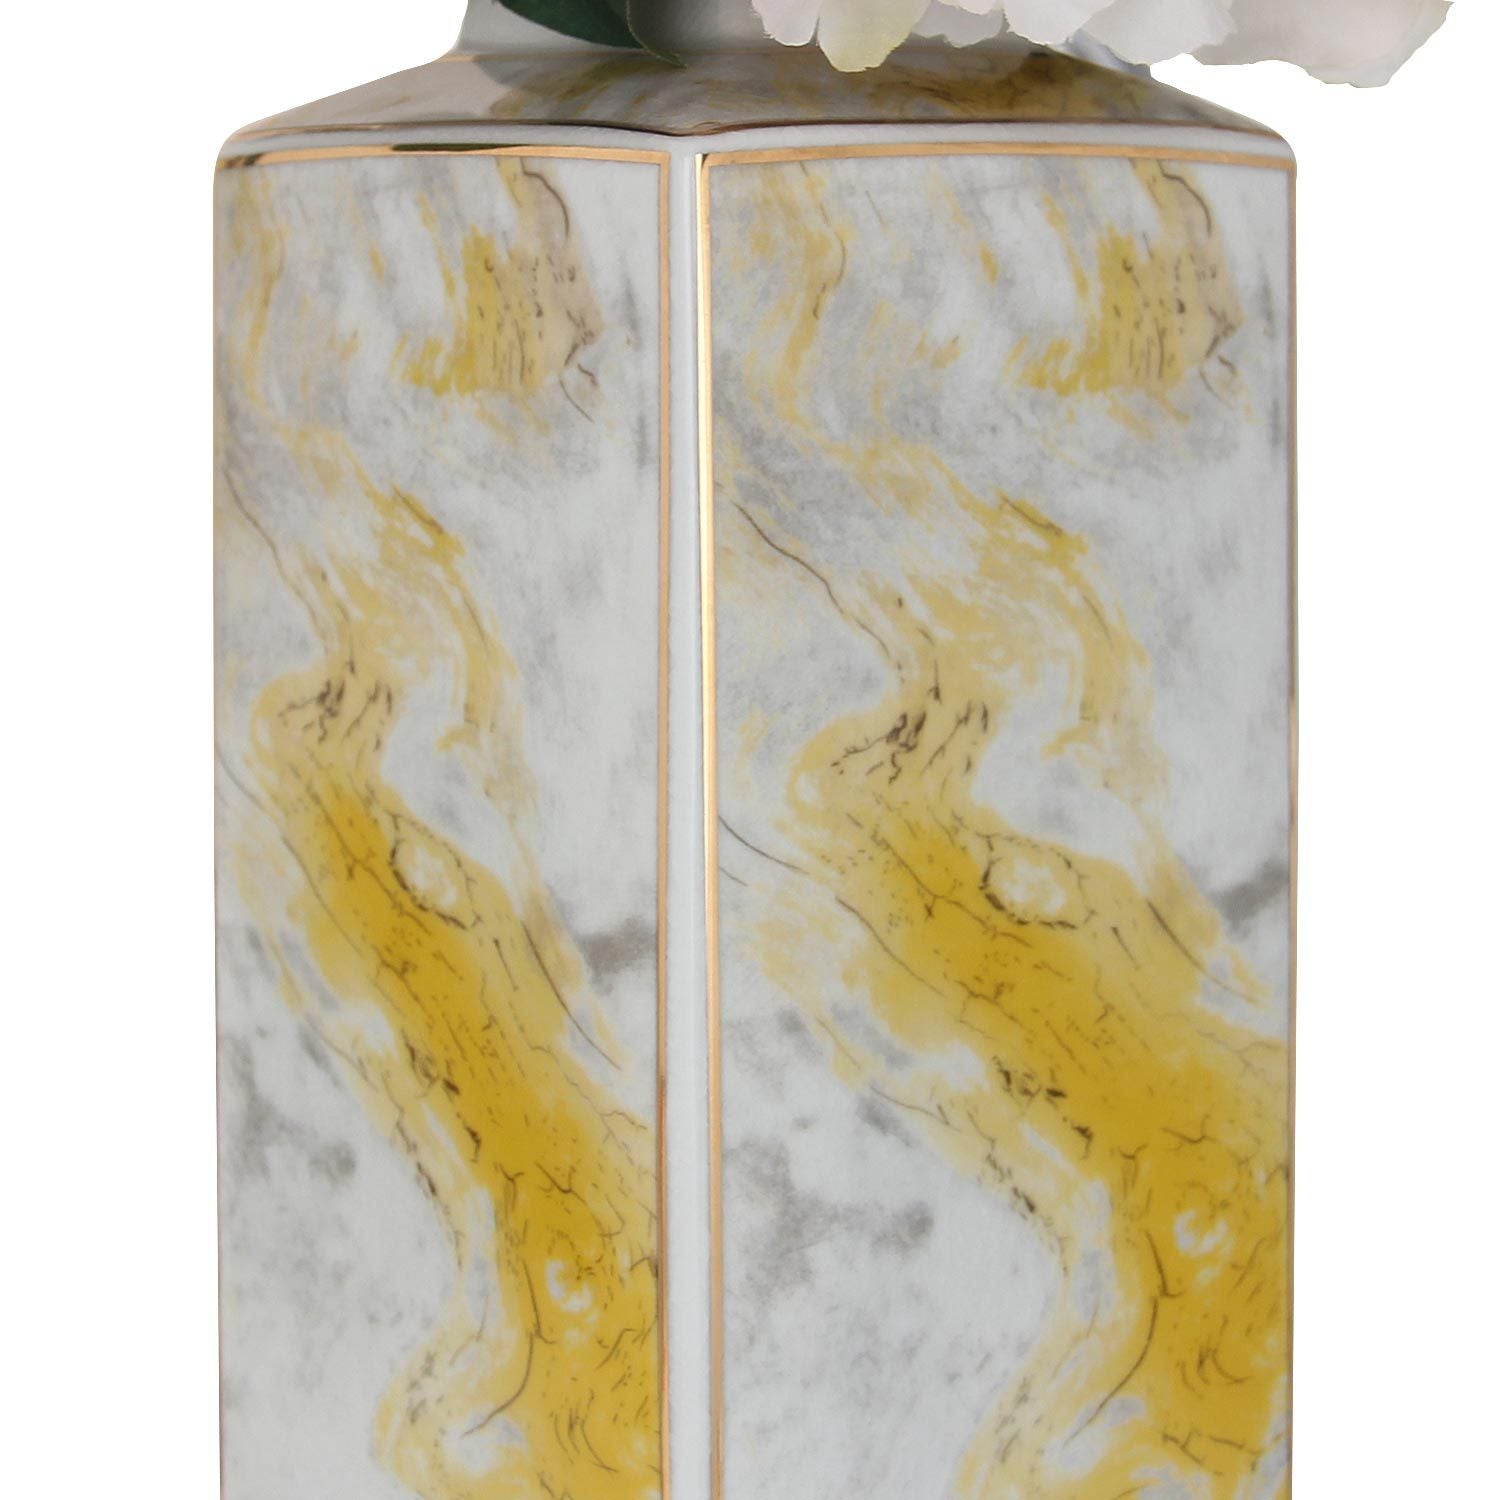 Square Glass Ginger Jar with Gold and Gray Marble gray-ceramic